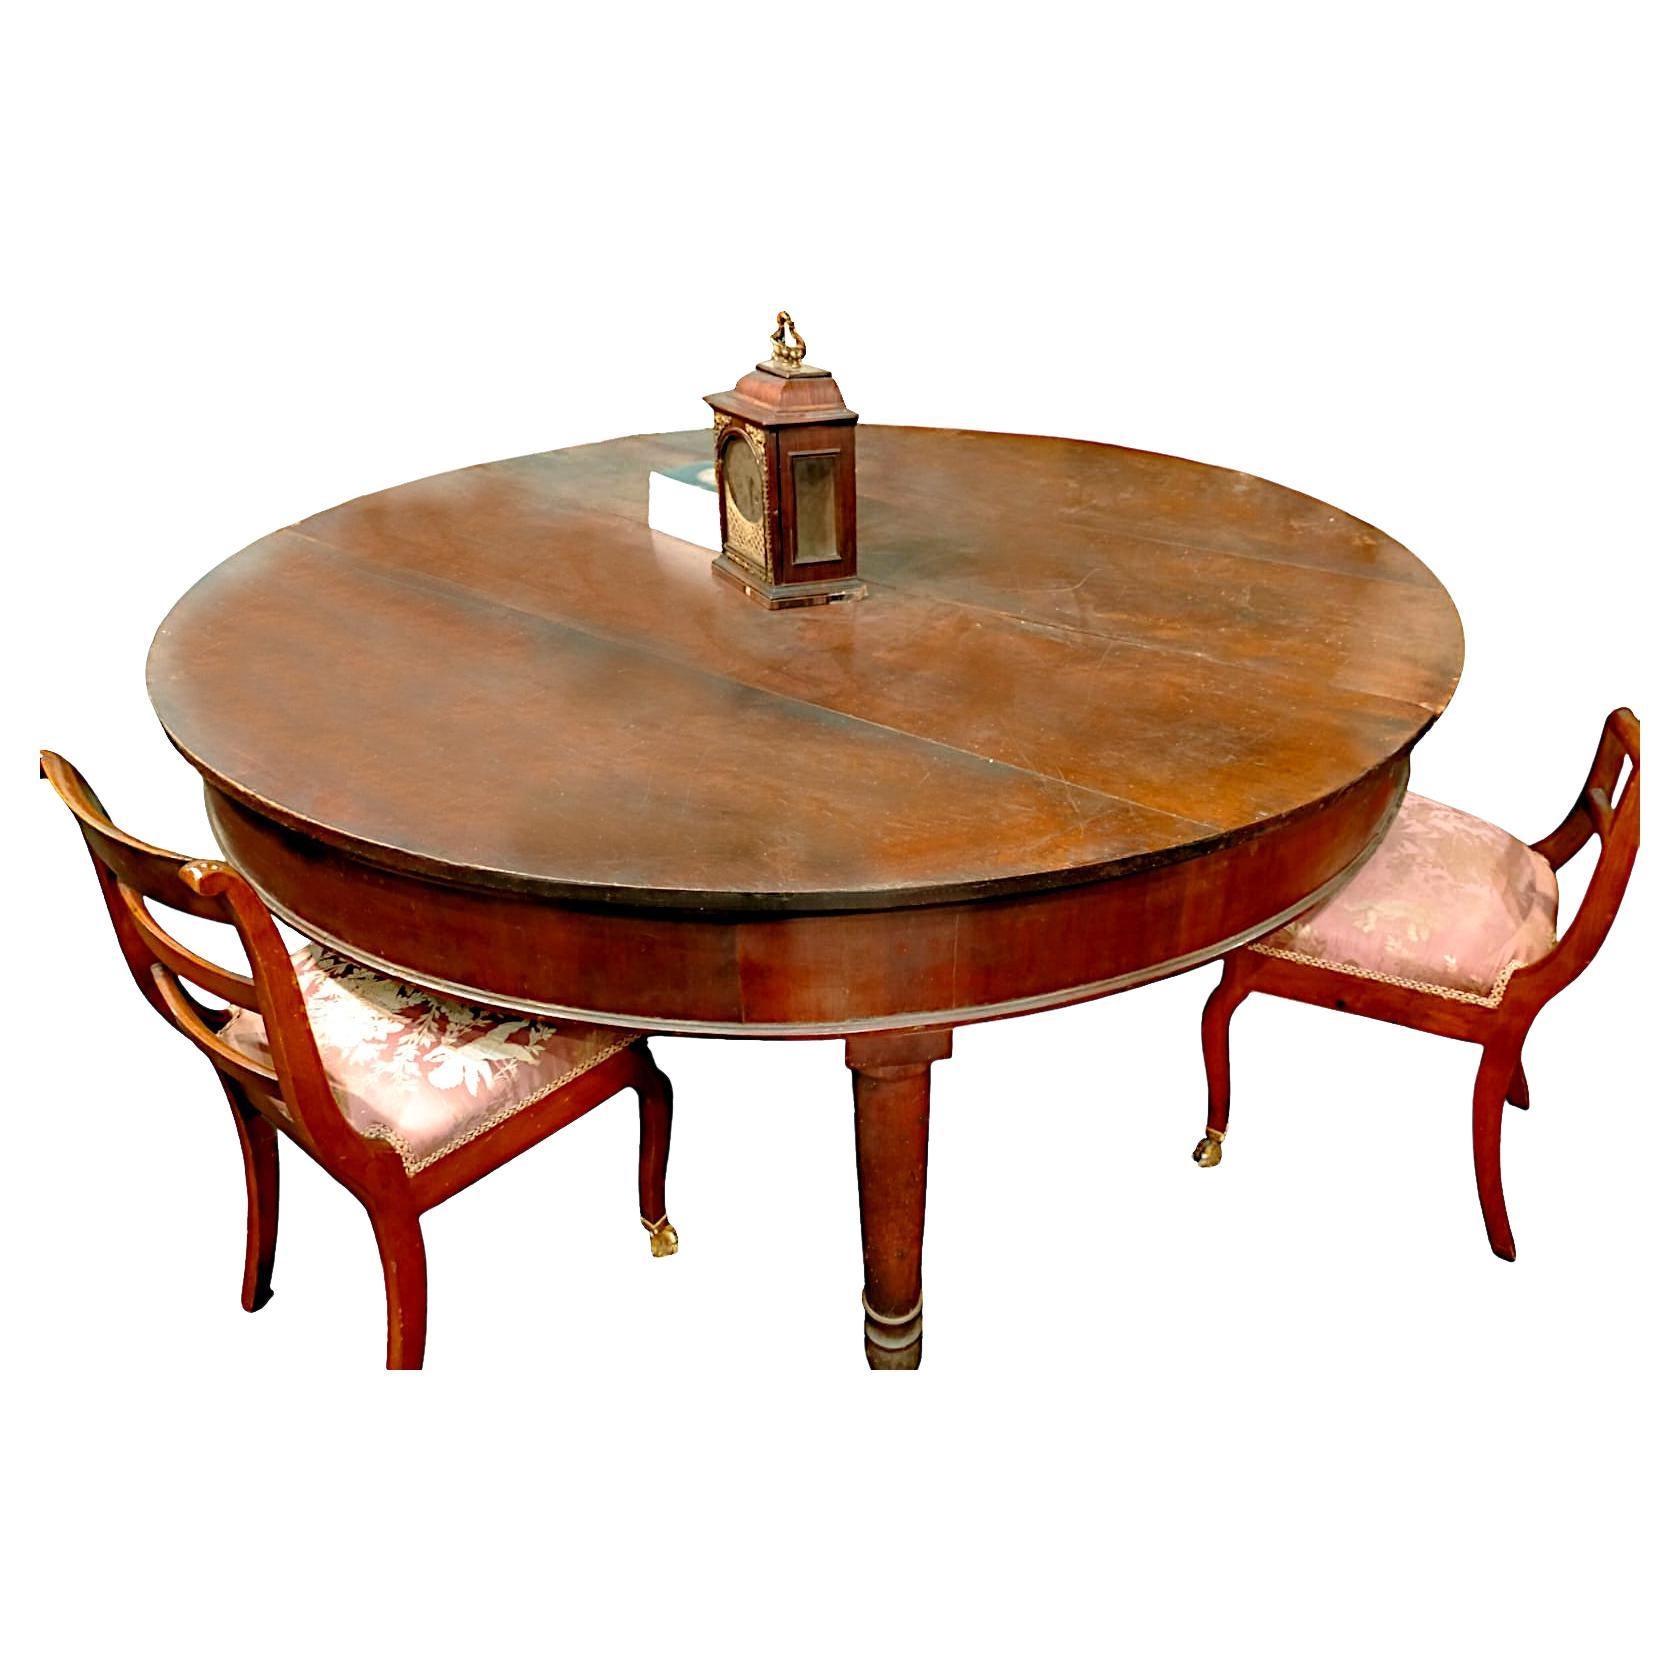 Large Round Extendable Walnut Table Charles X Period, Early 19th Century' For Sale